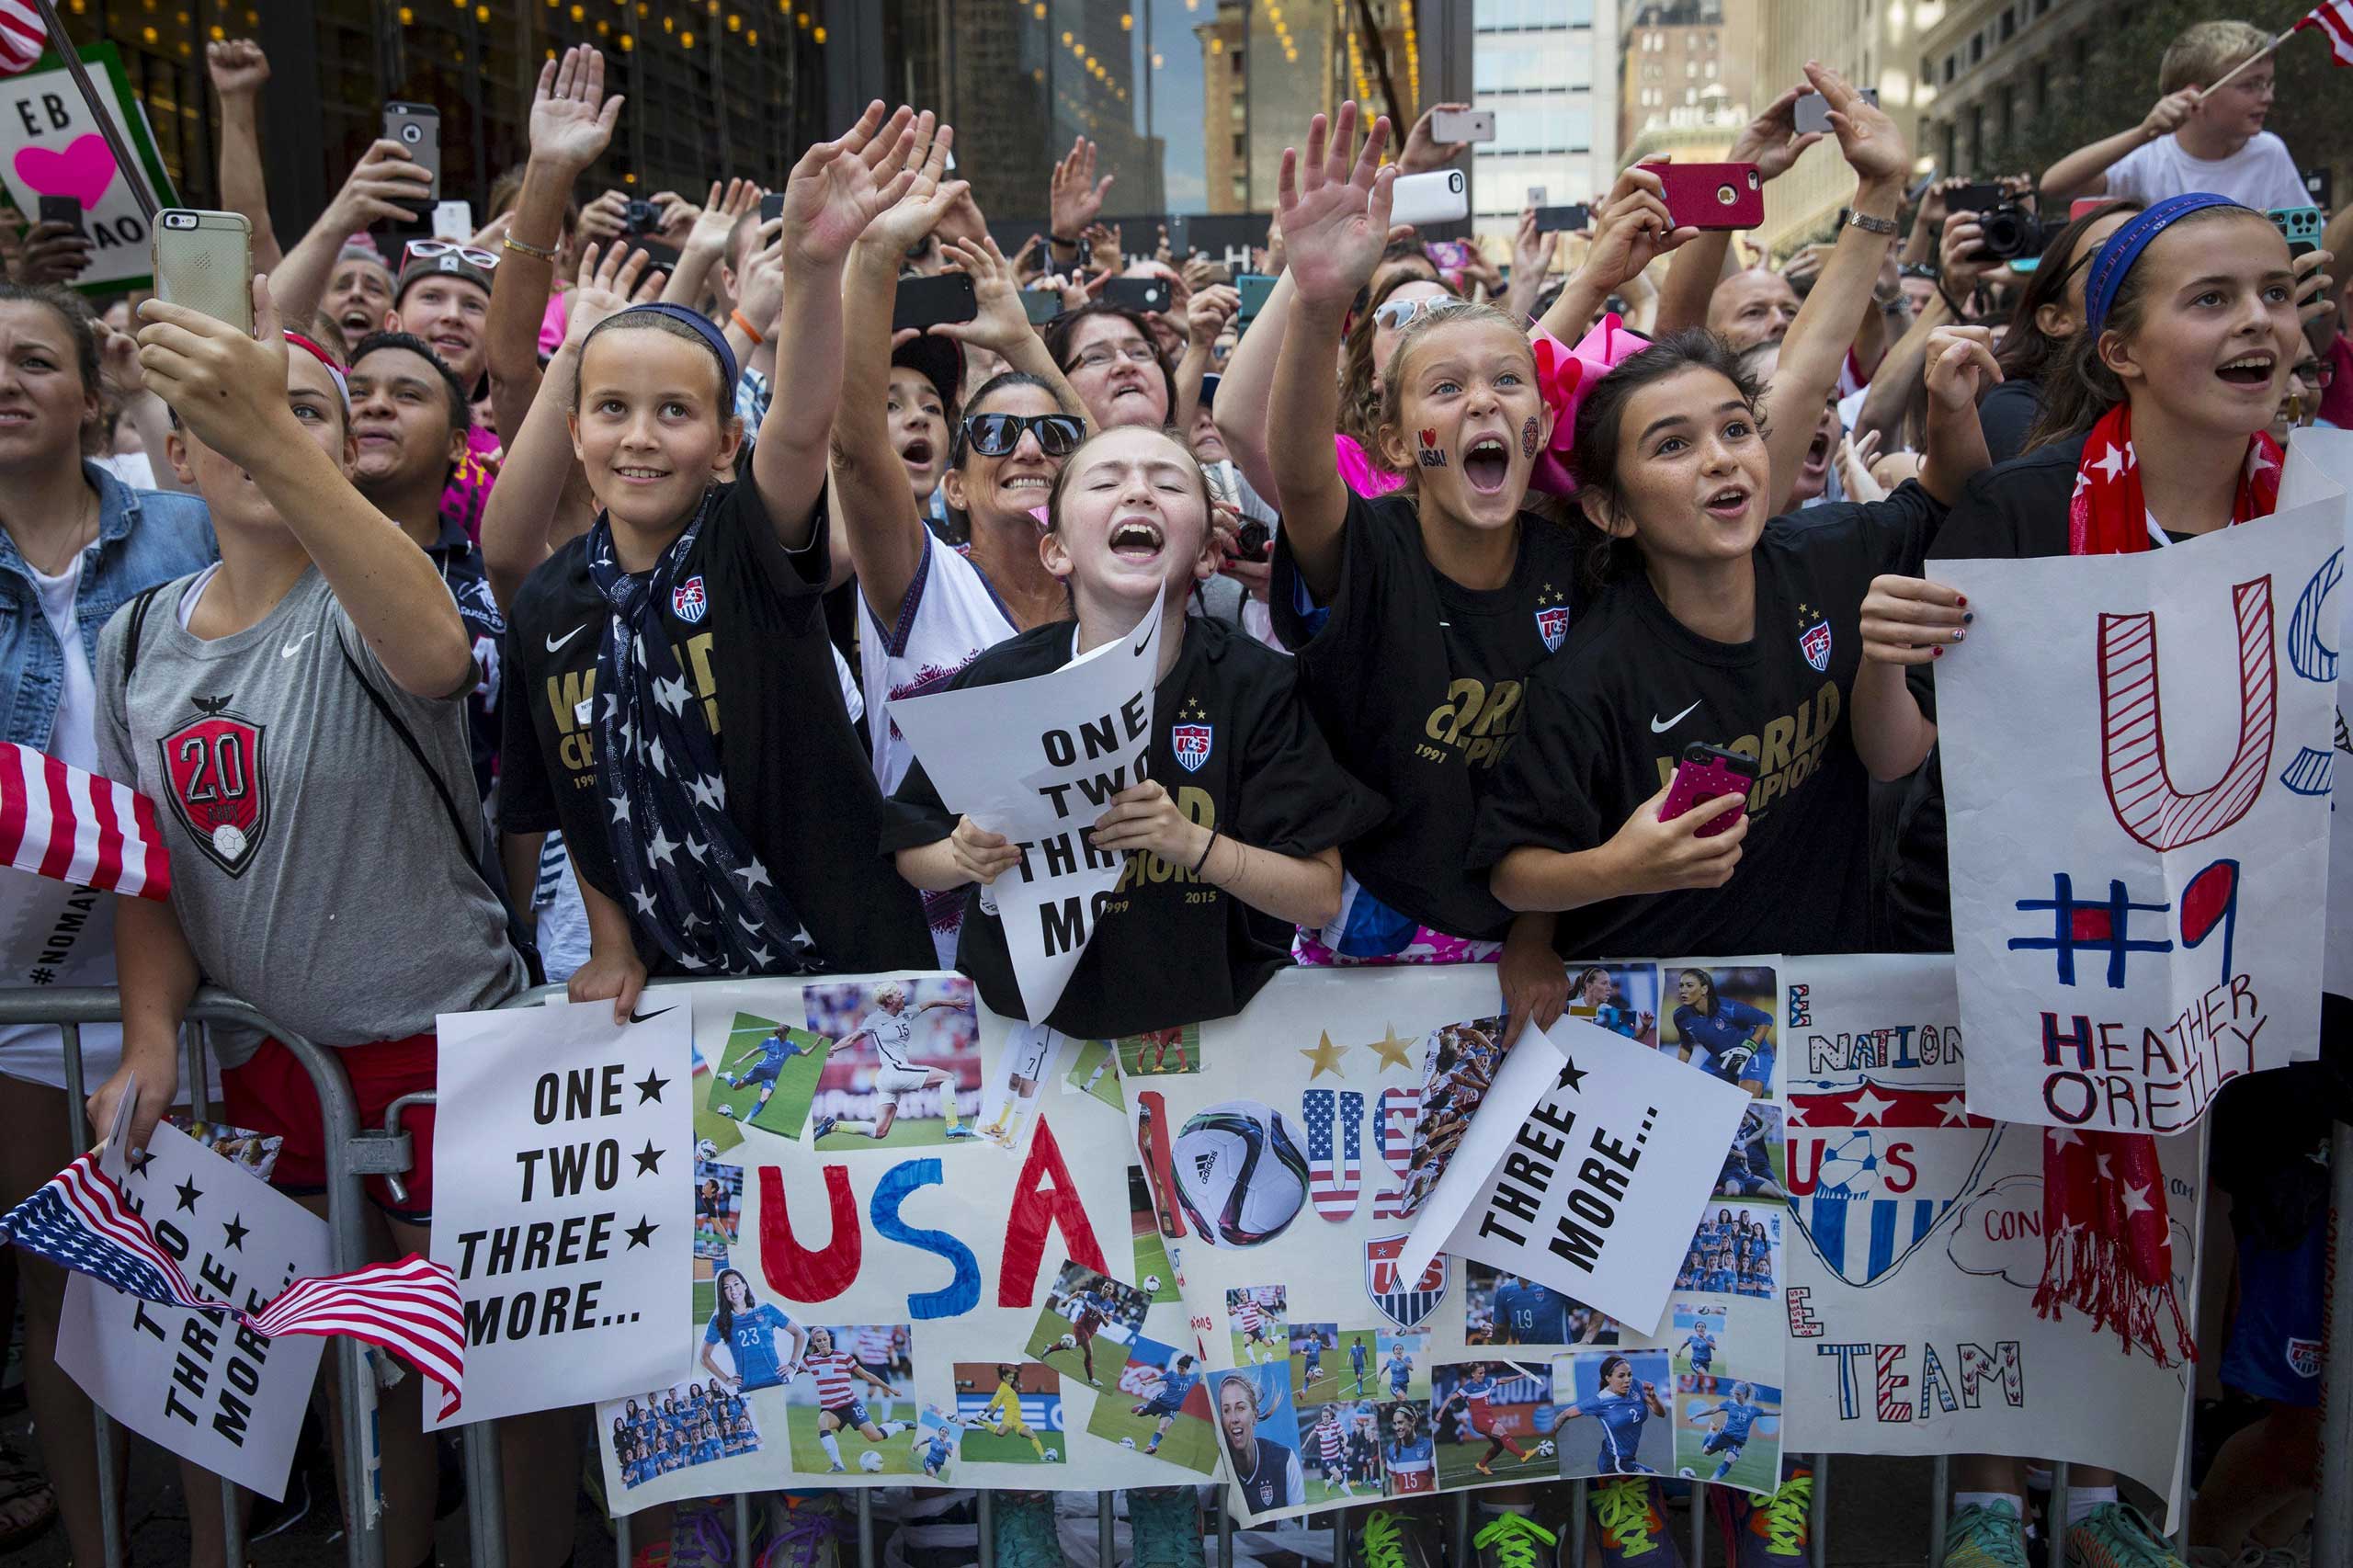 Fans of the U.S. women's soccer team cheer during the ticker tape parade to celebrate their World Cup victory, in New York City on July 10, 2015.